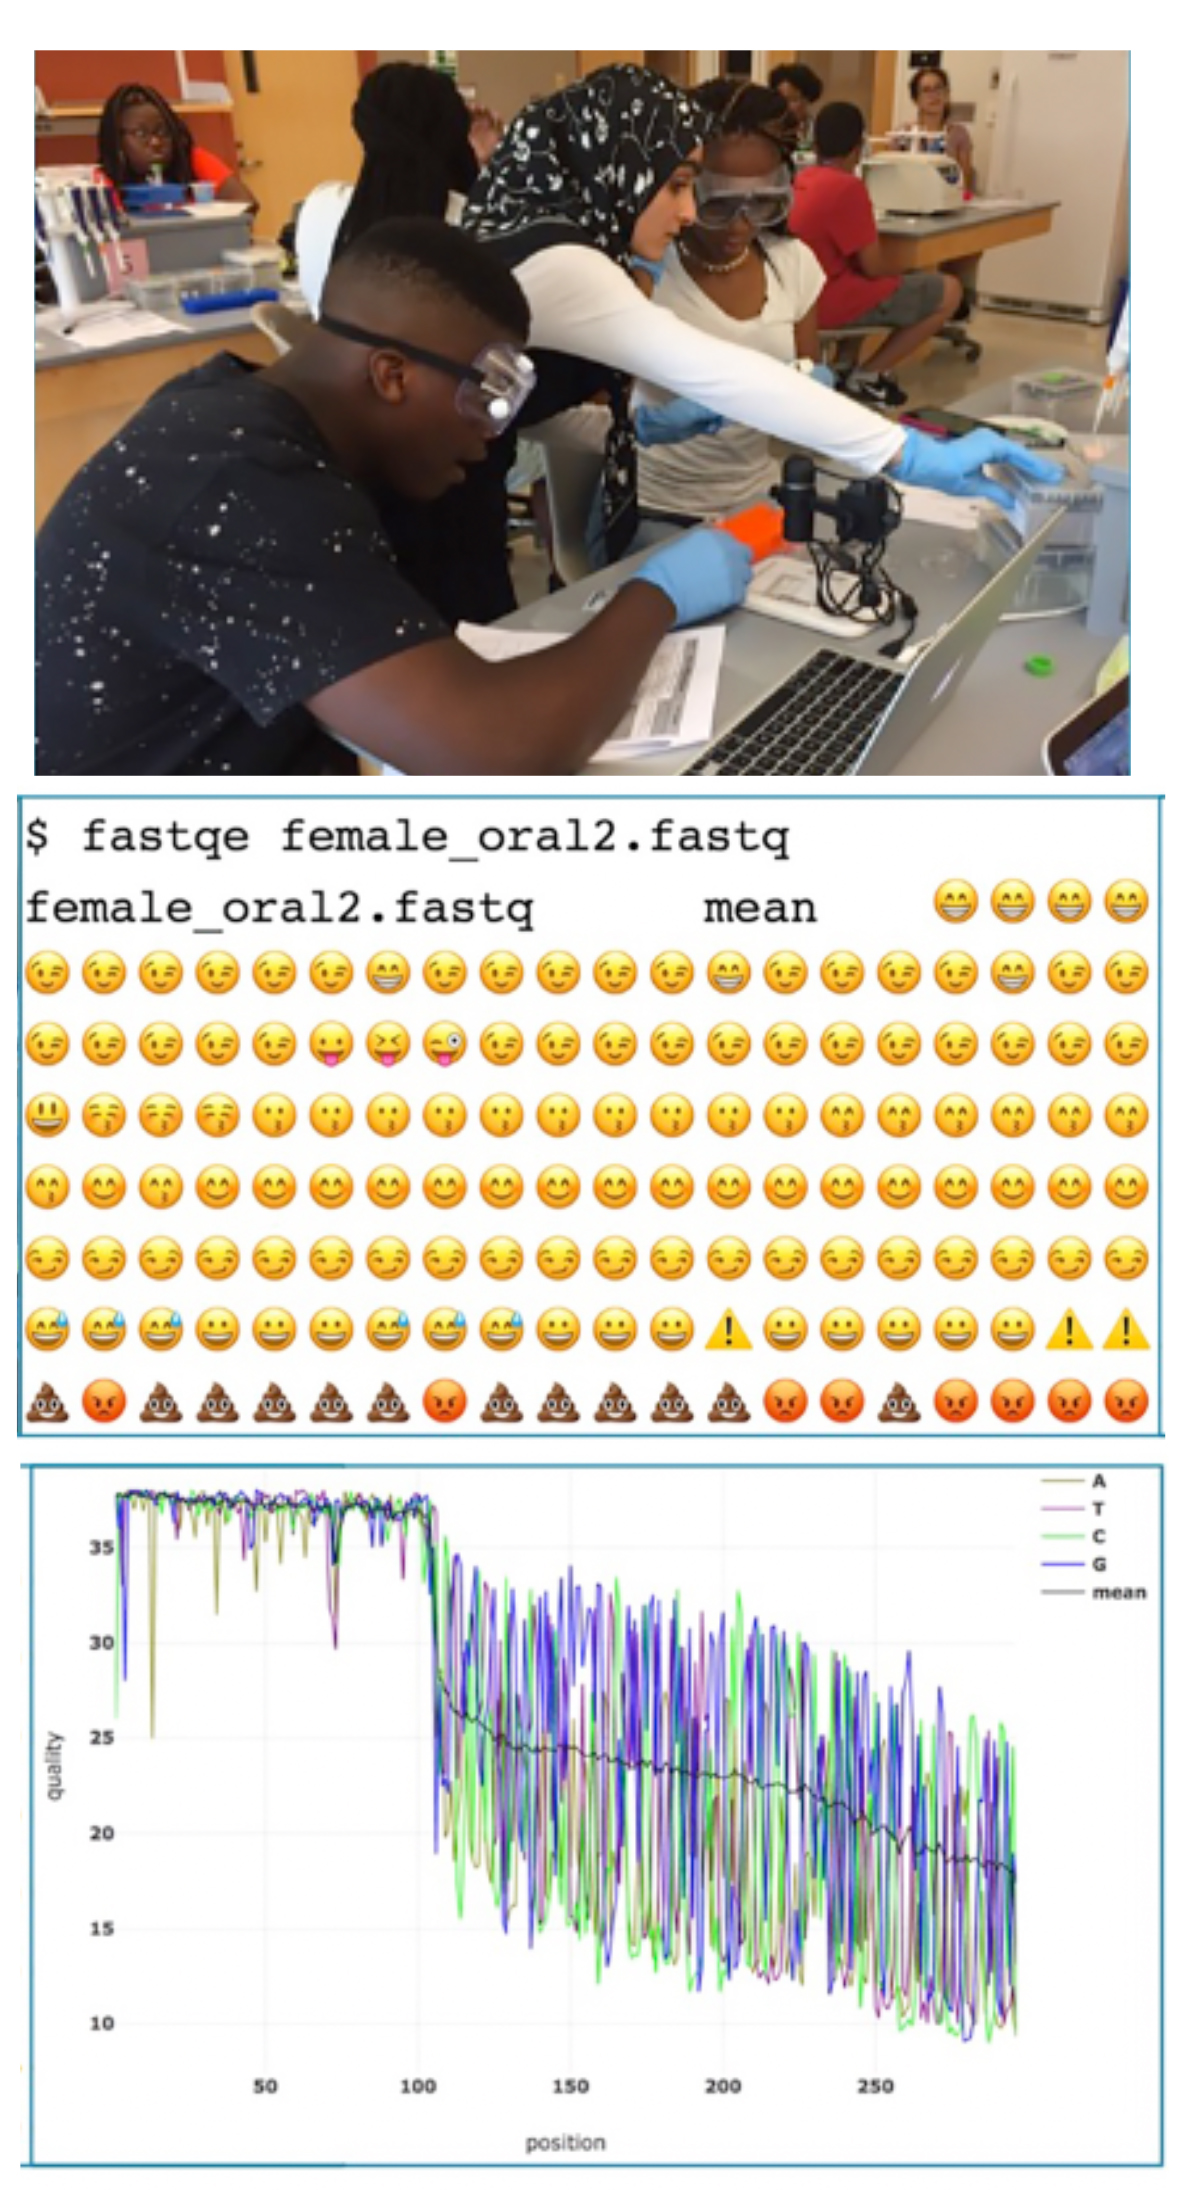 A Fun Introductory Command Line Lesson: Next Generation Sequencing Quality Analysis with Emoji!